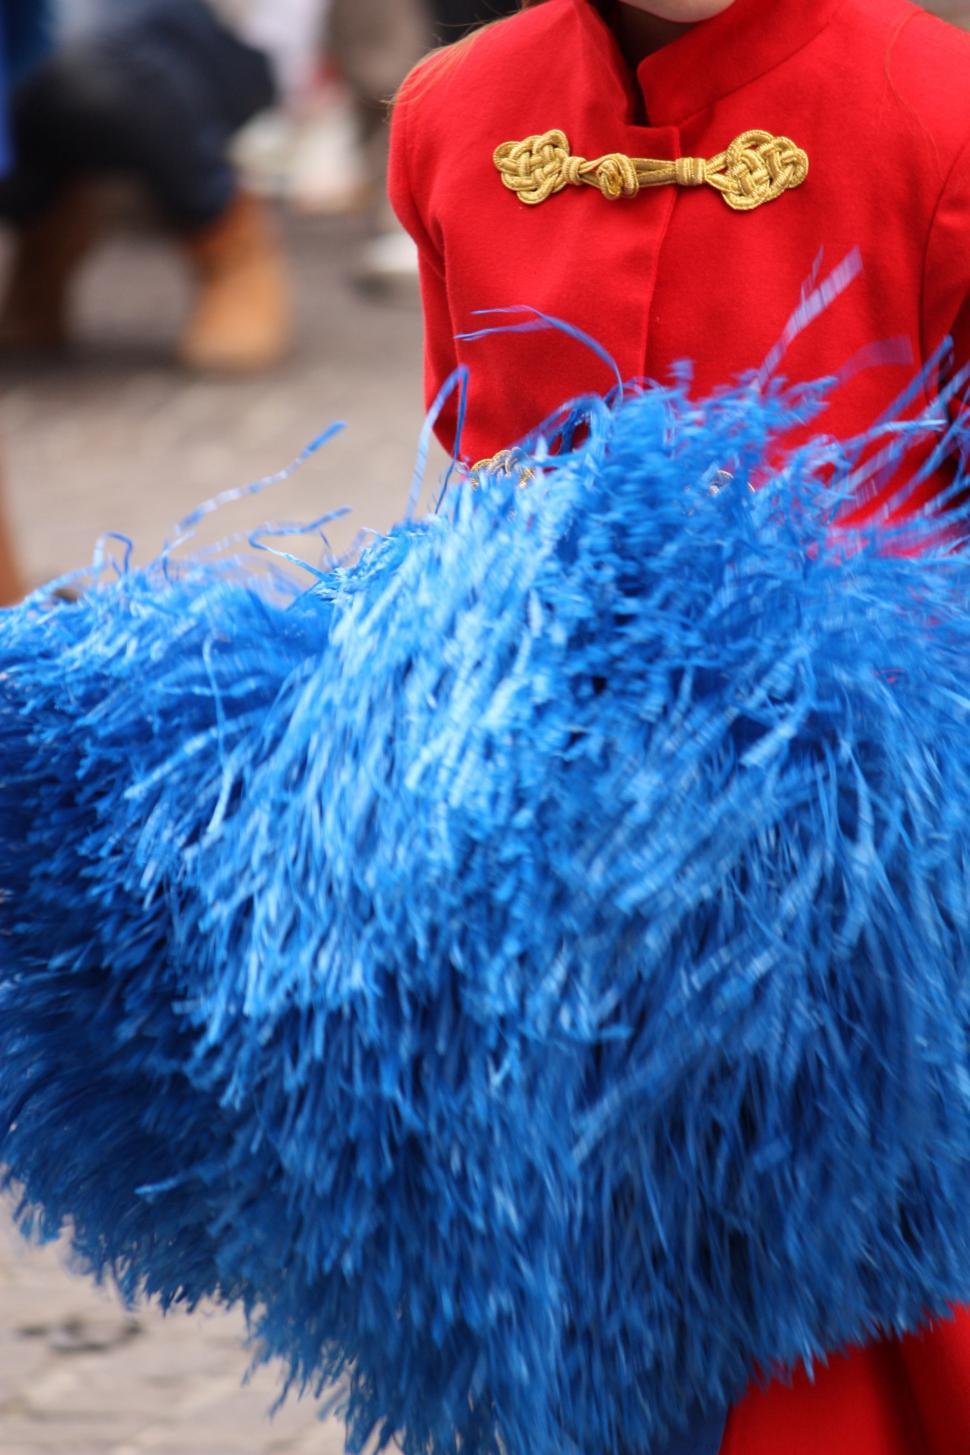 Free Image of Young Boy in Red Uniform Holding Blue Feathered Object 